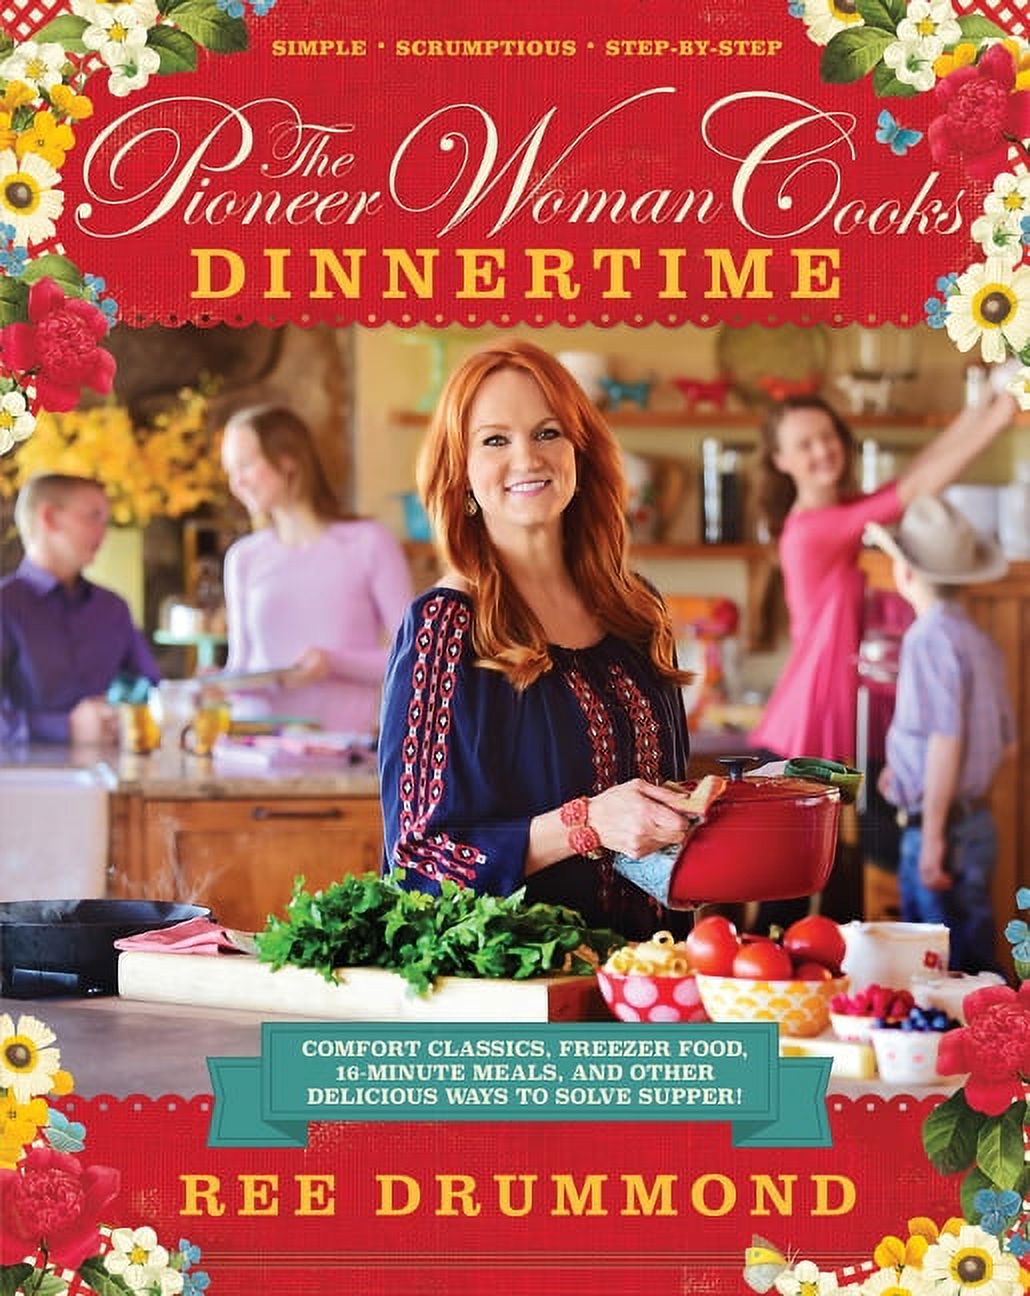 The Pioneer Woman Cooks--Dinnertime (Hardcover) - image 1 of 5